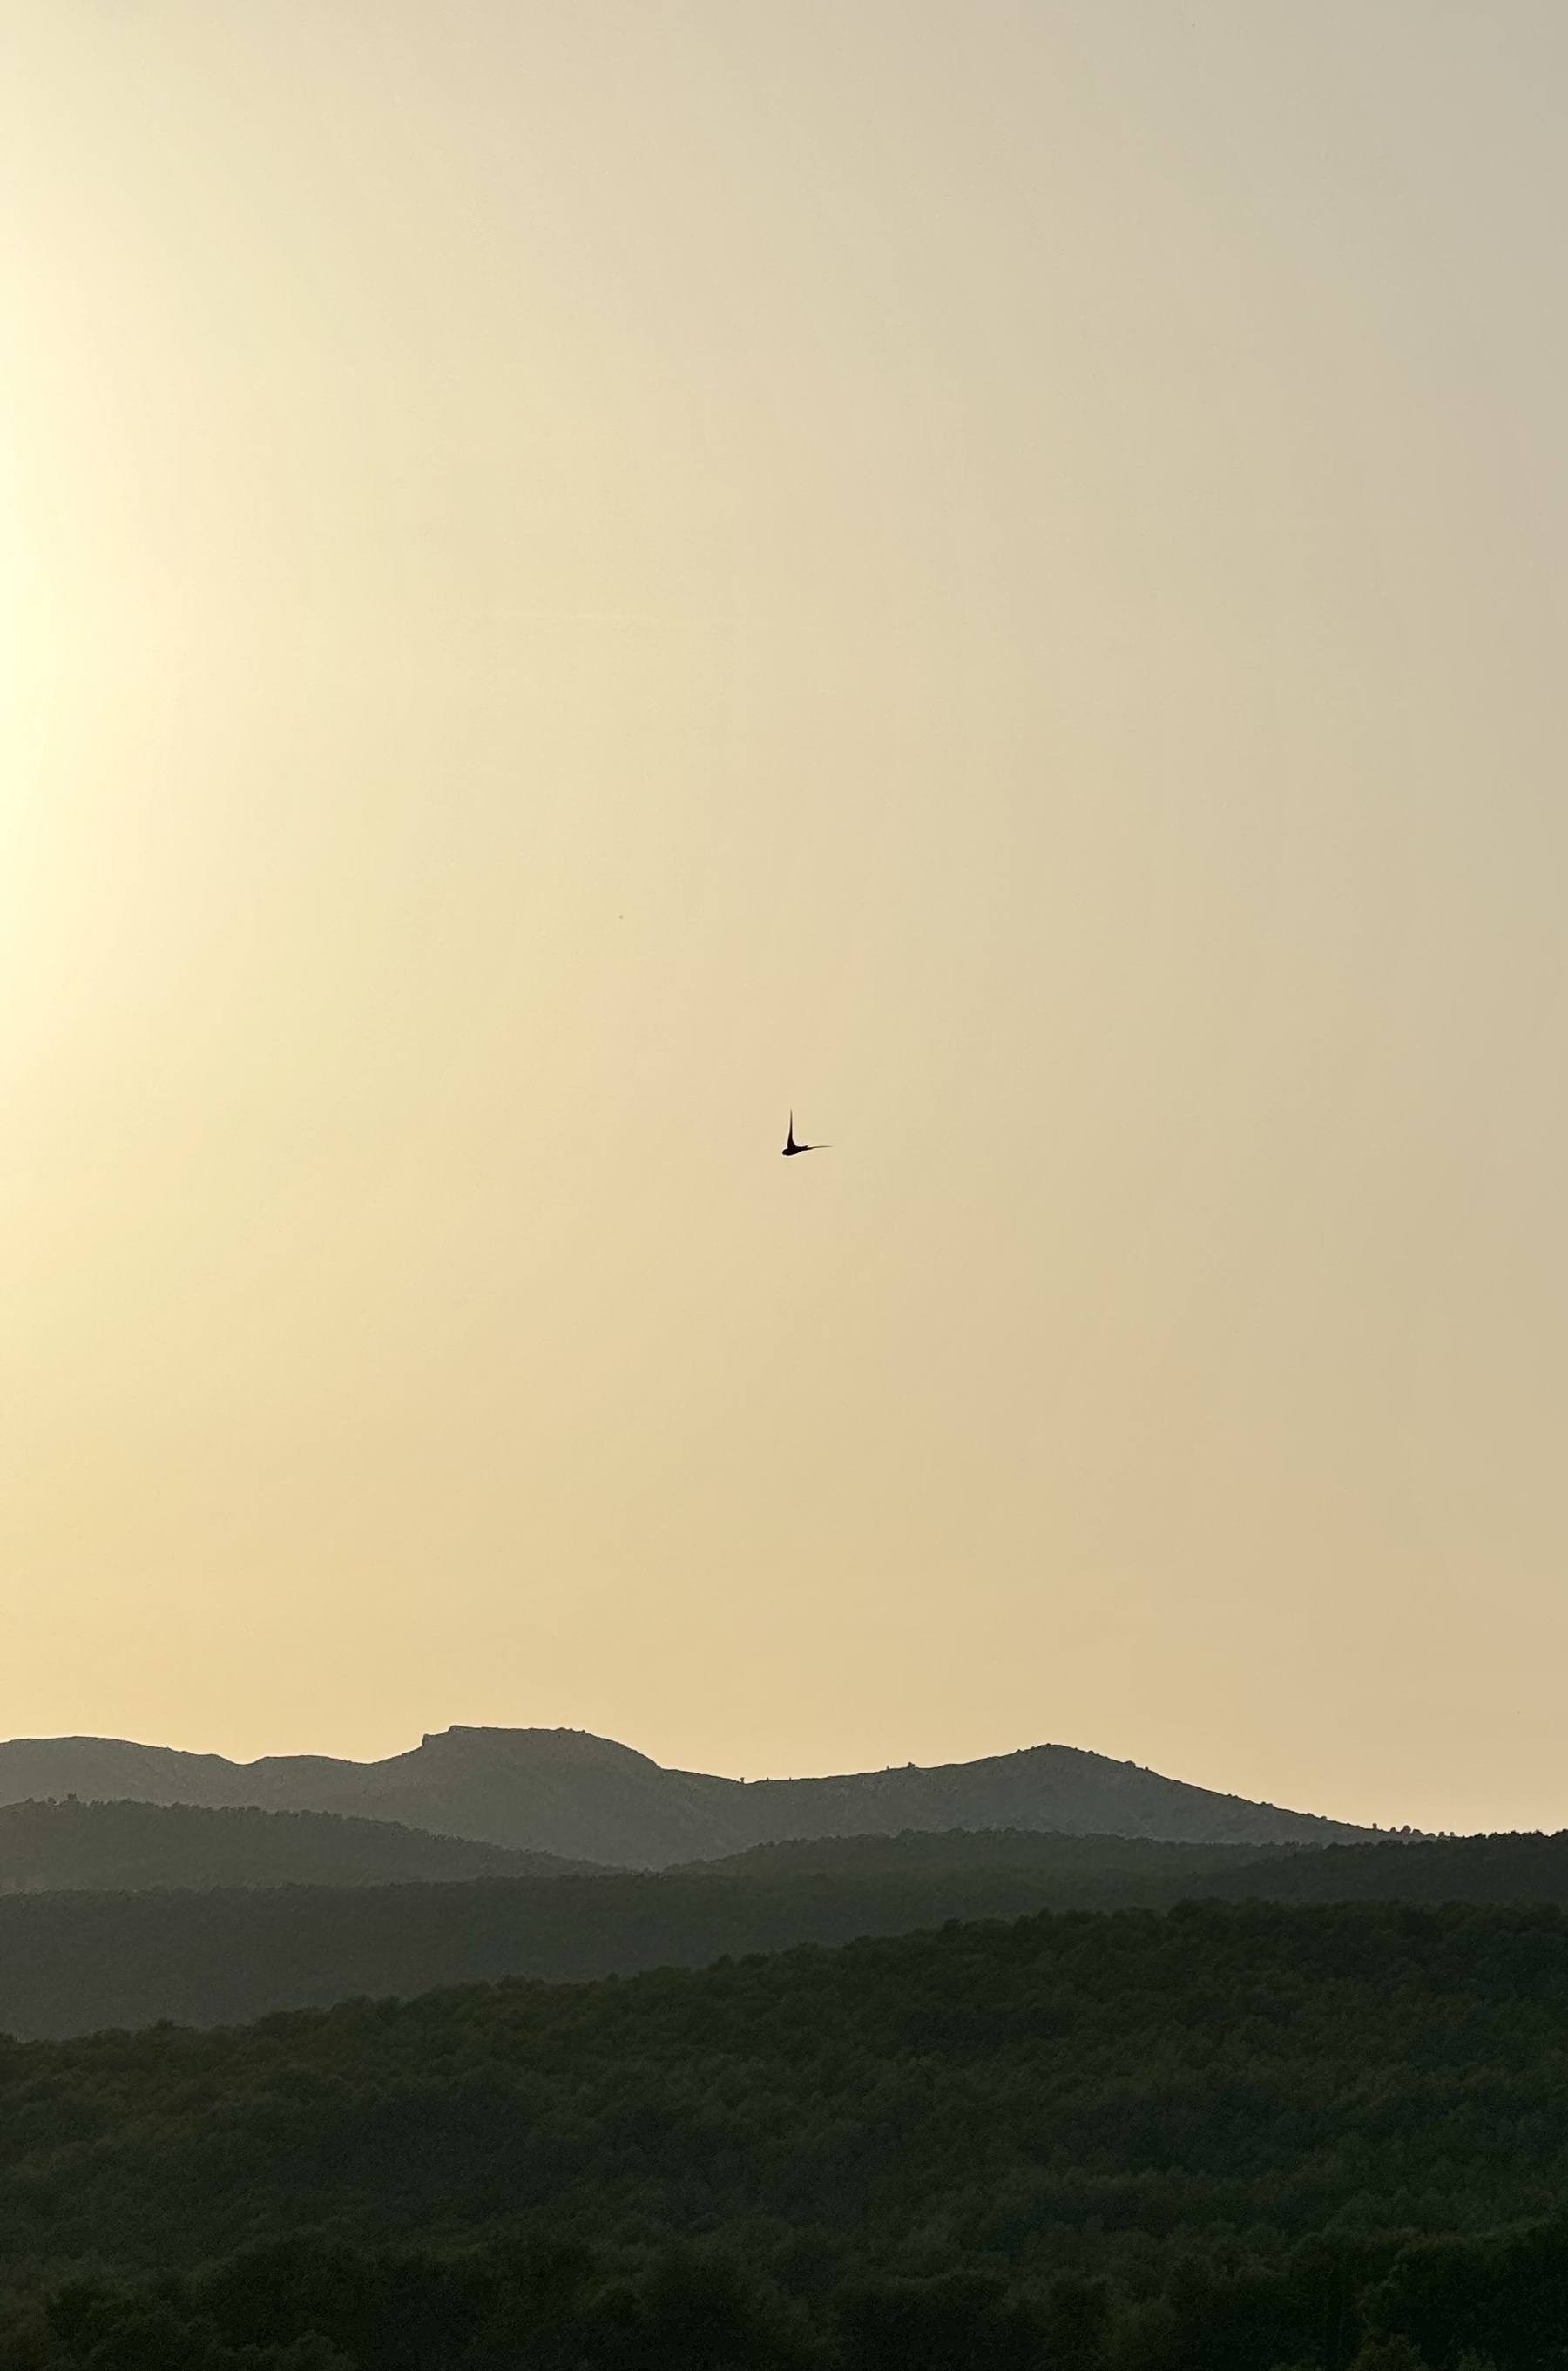 A bird flying above hills at sunset.